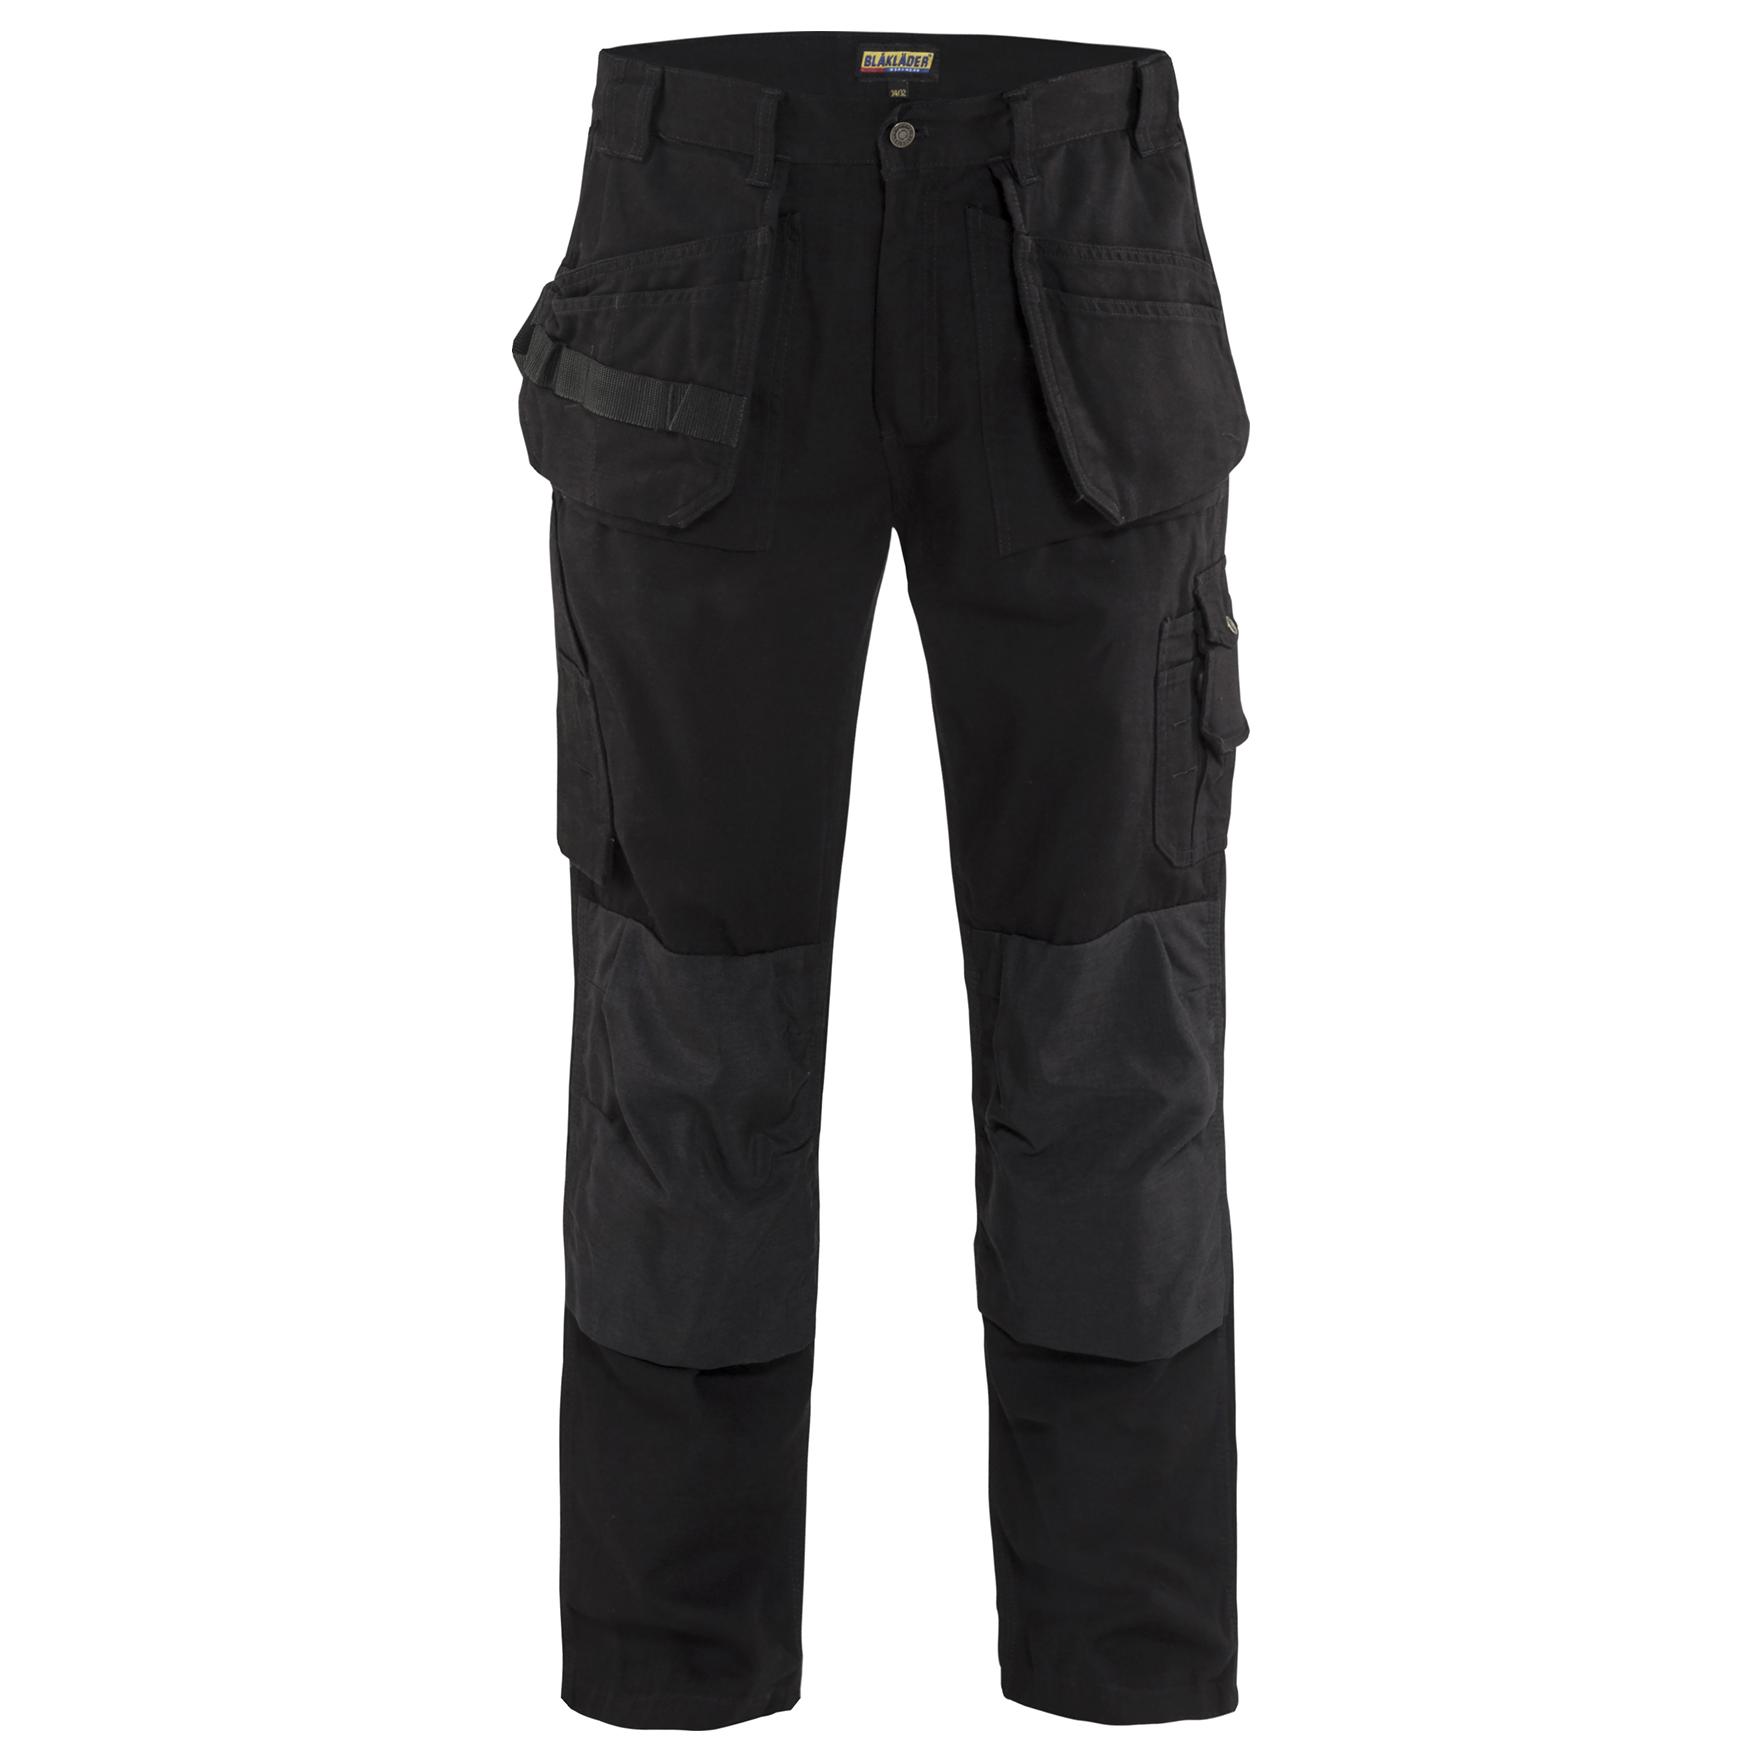 Portwest Texo Contrast Combat Cargo Work Shorts Trousers Pants Tool Pockets TX14 